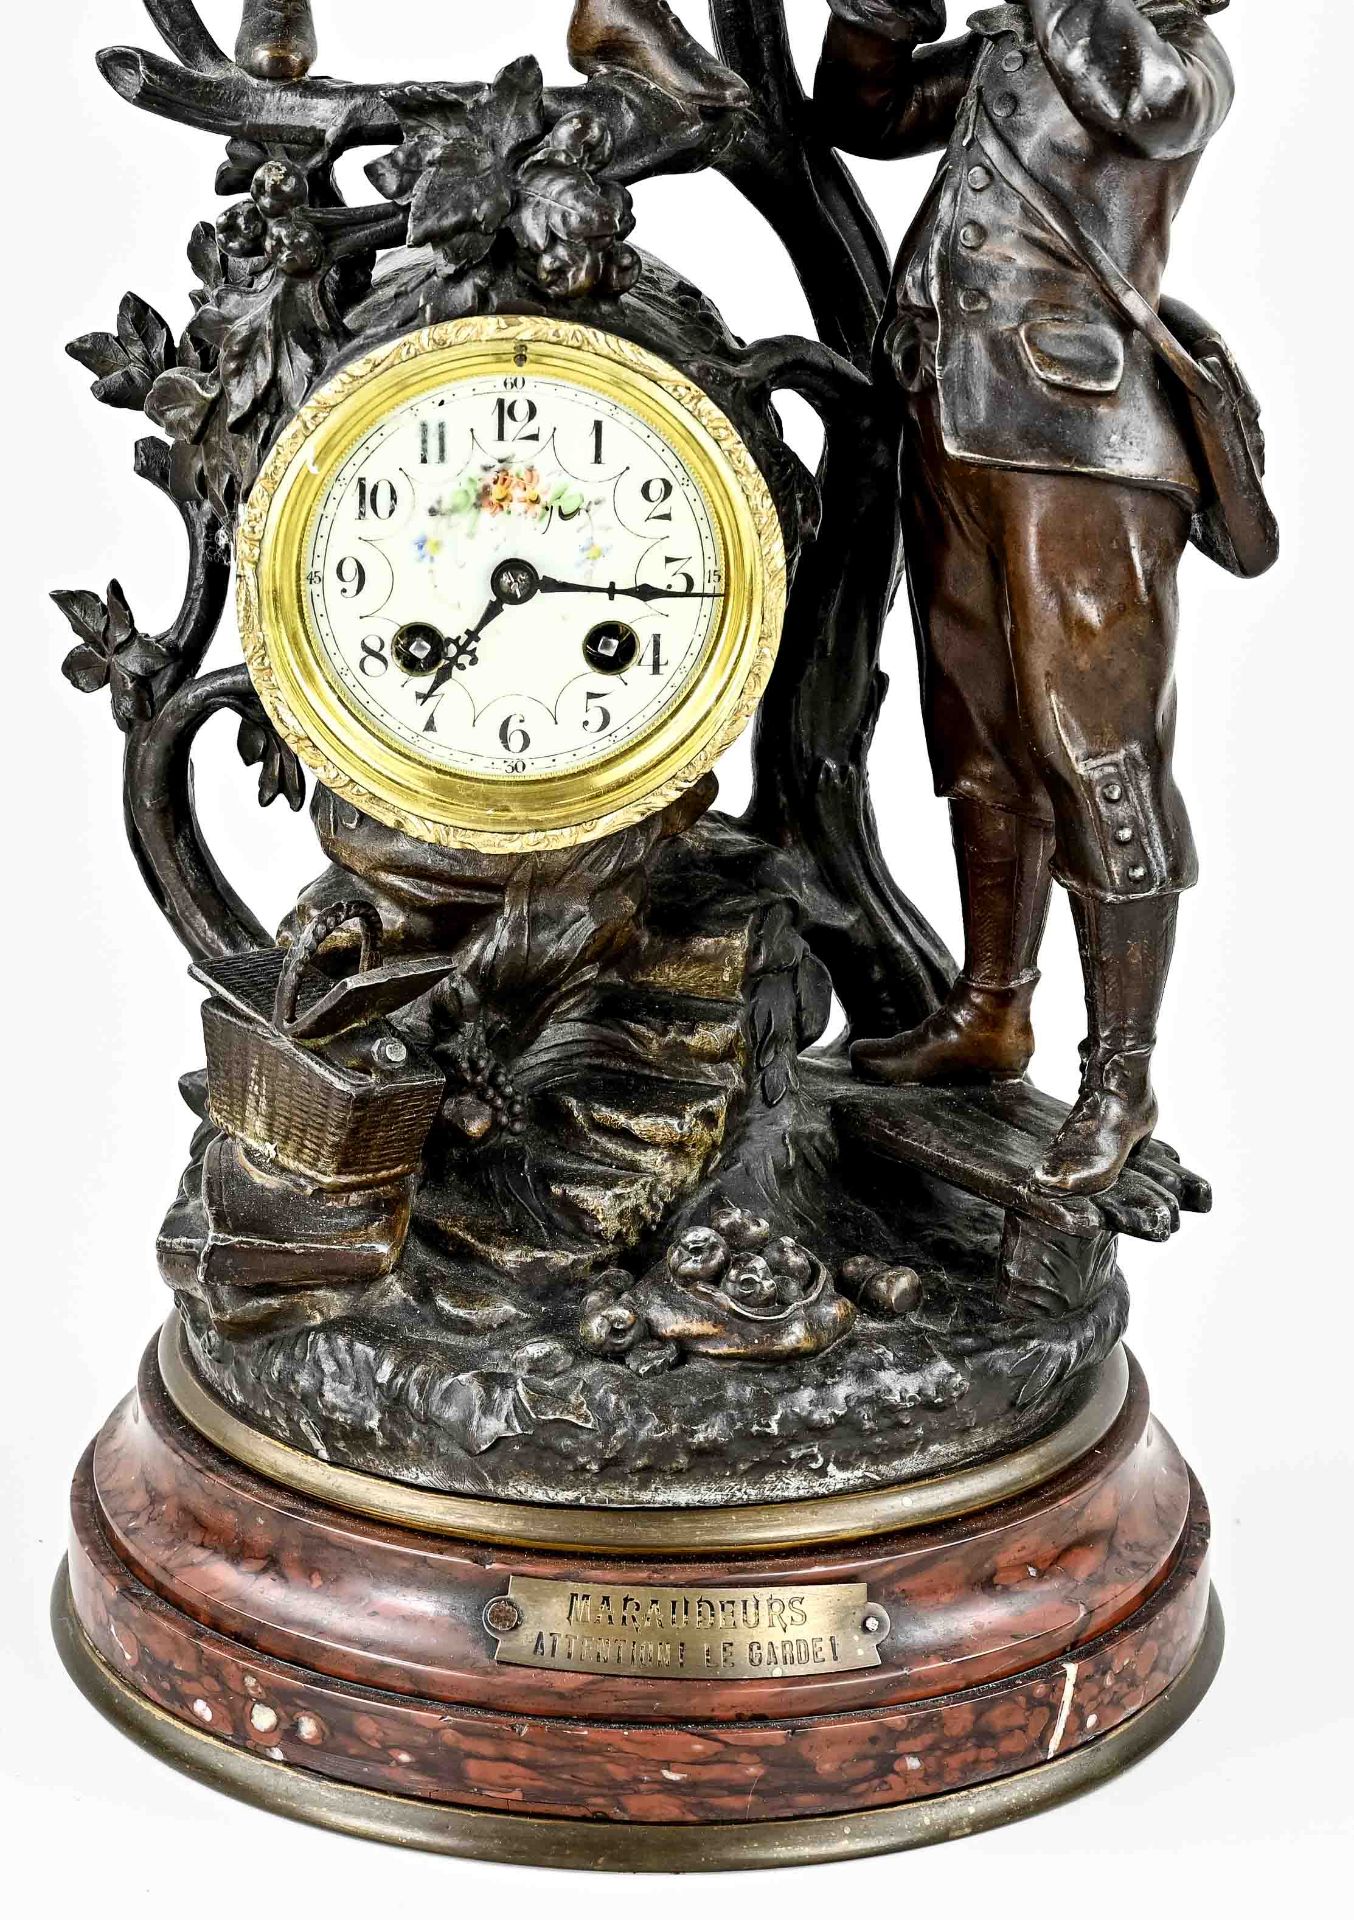 Antique French mantel clock - Image 2 of 3